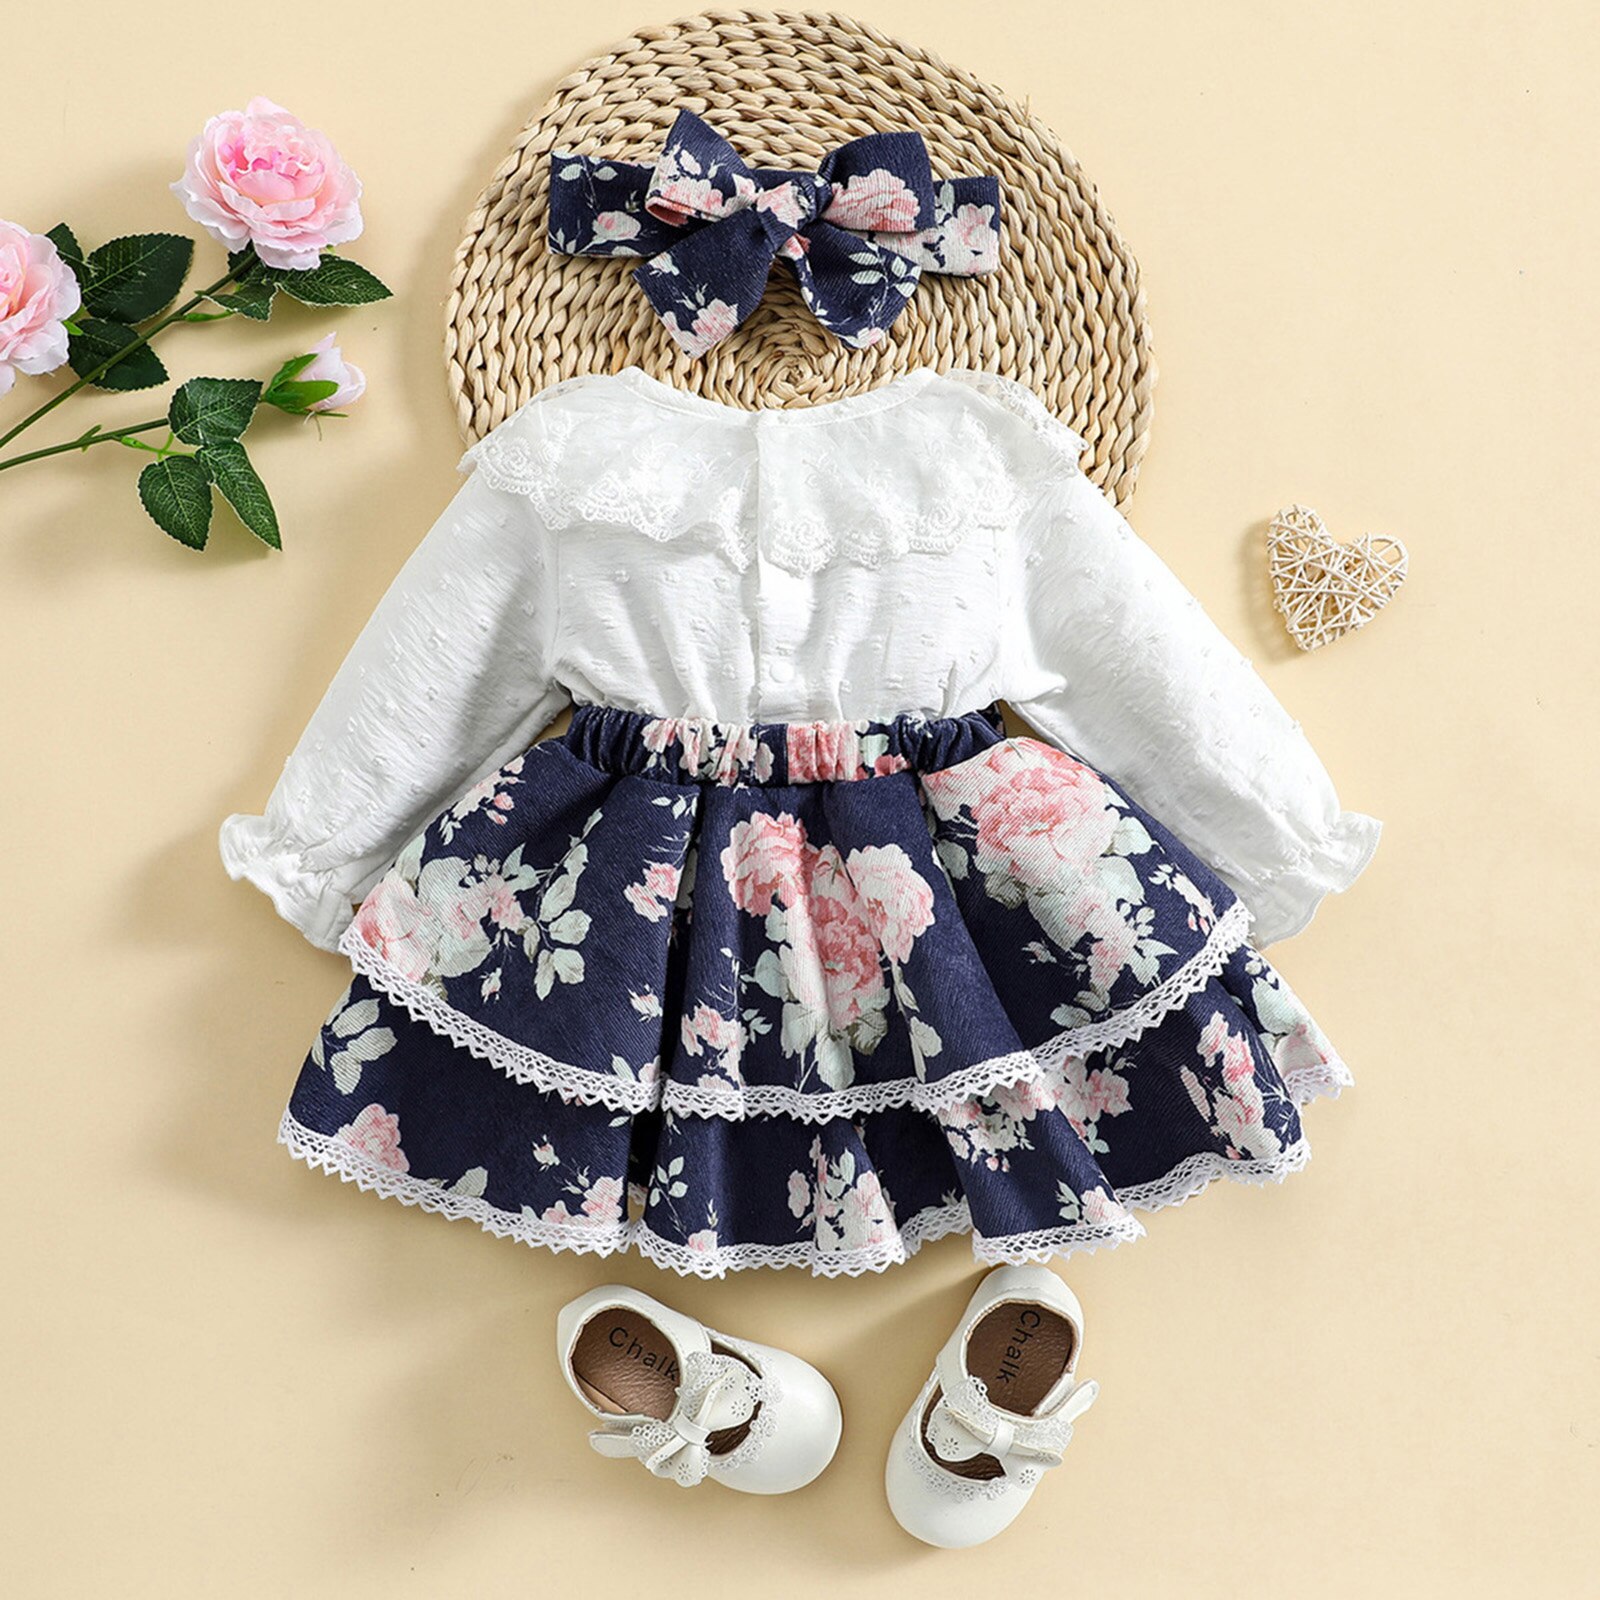 ma-baby-6-24M-Infant-Newborn-Baby-Girl-Dress-Floral-Print-Ruffle-Bow-A-line-Dresses-2